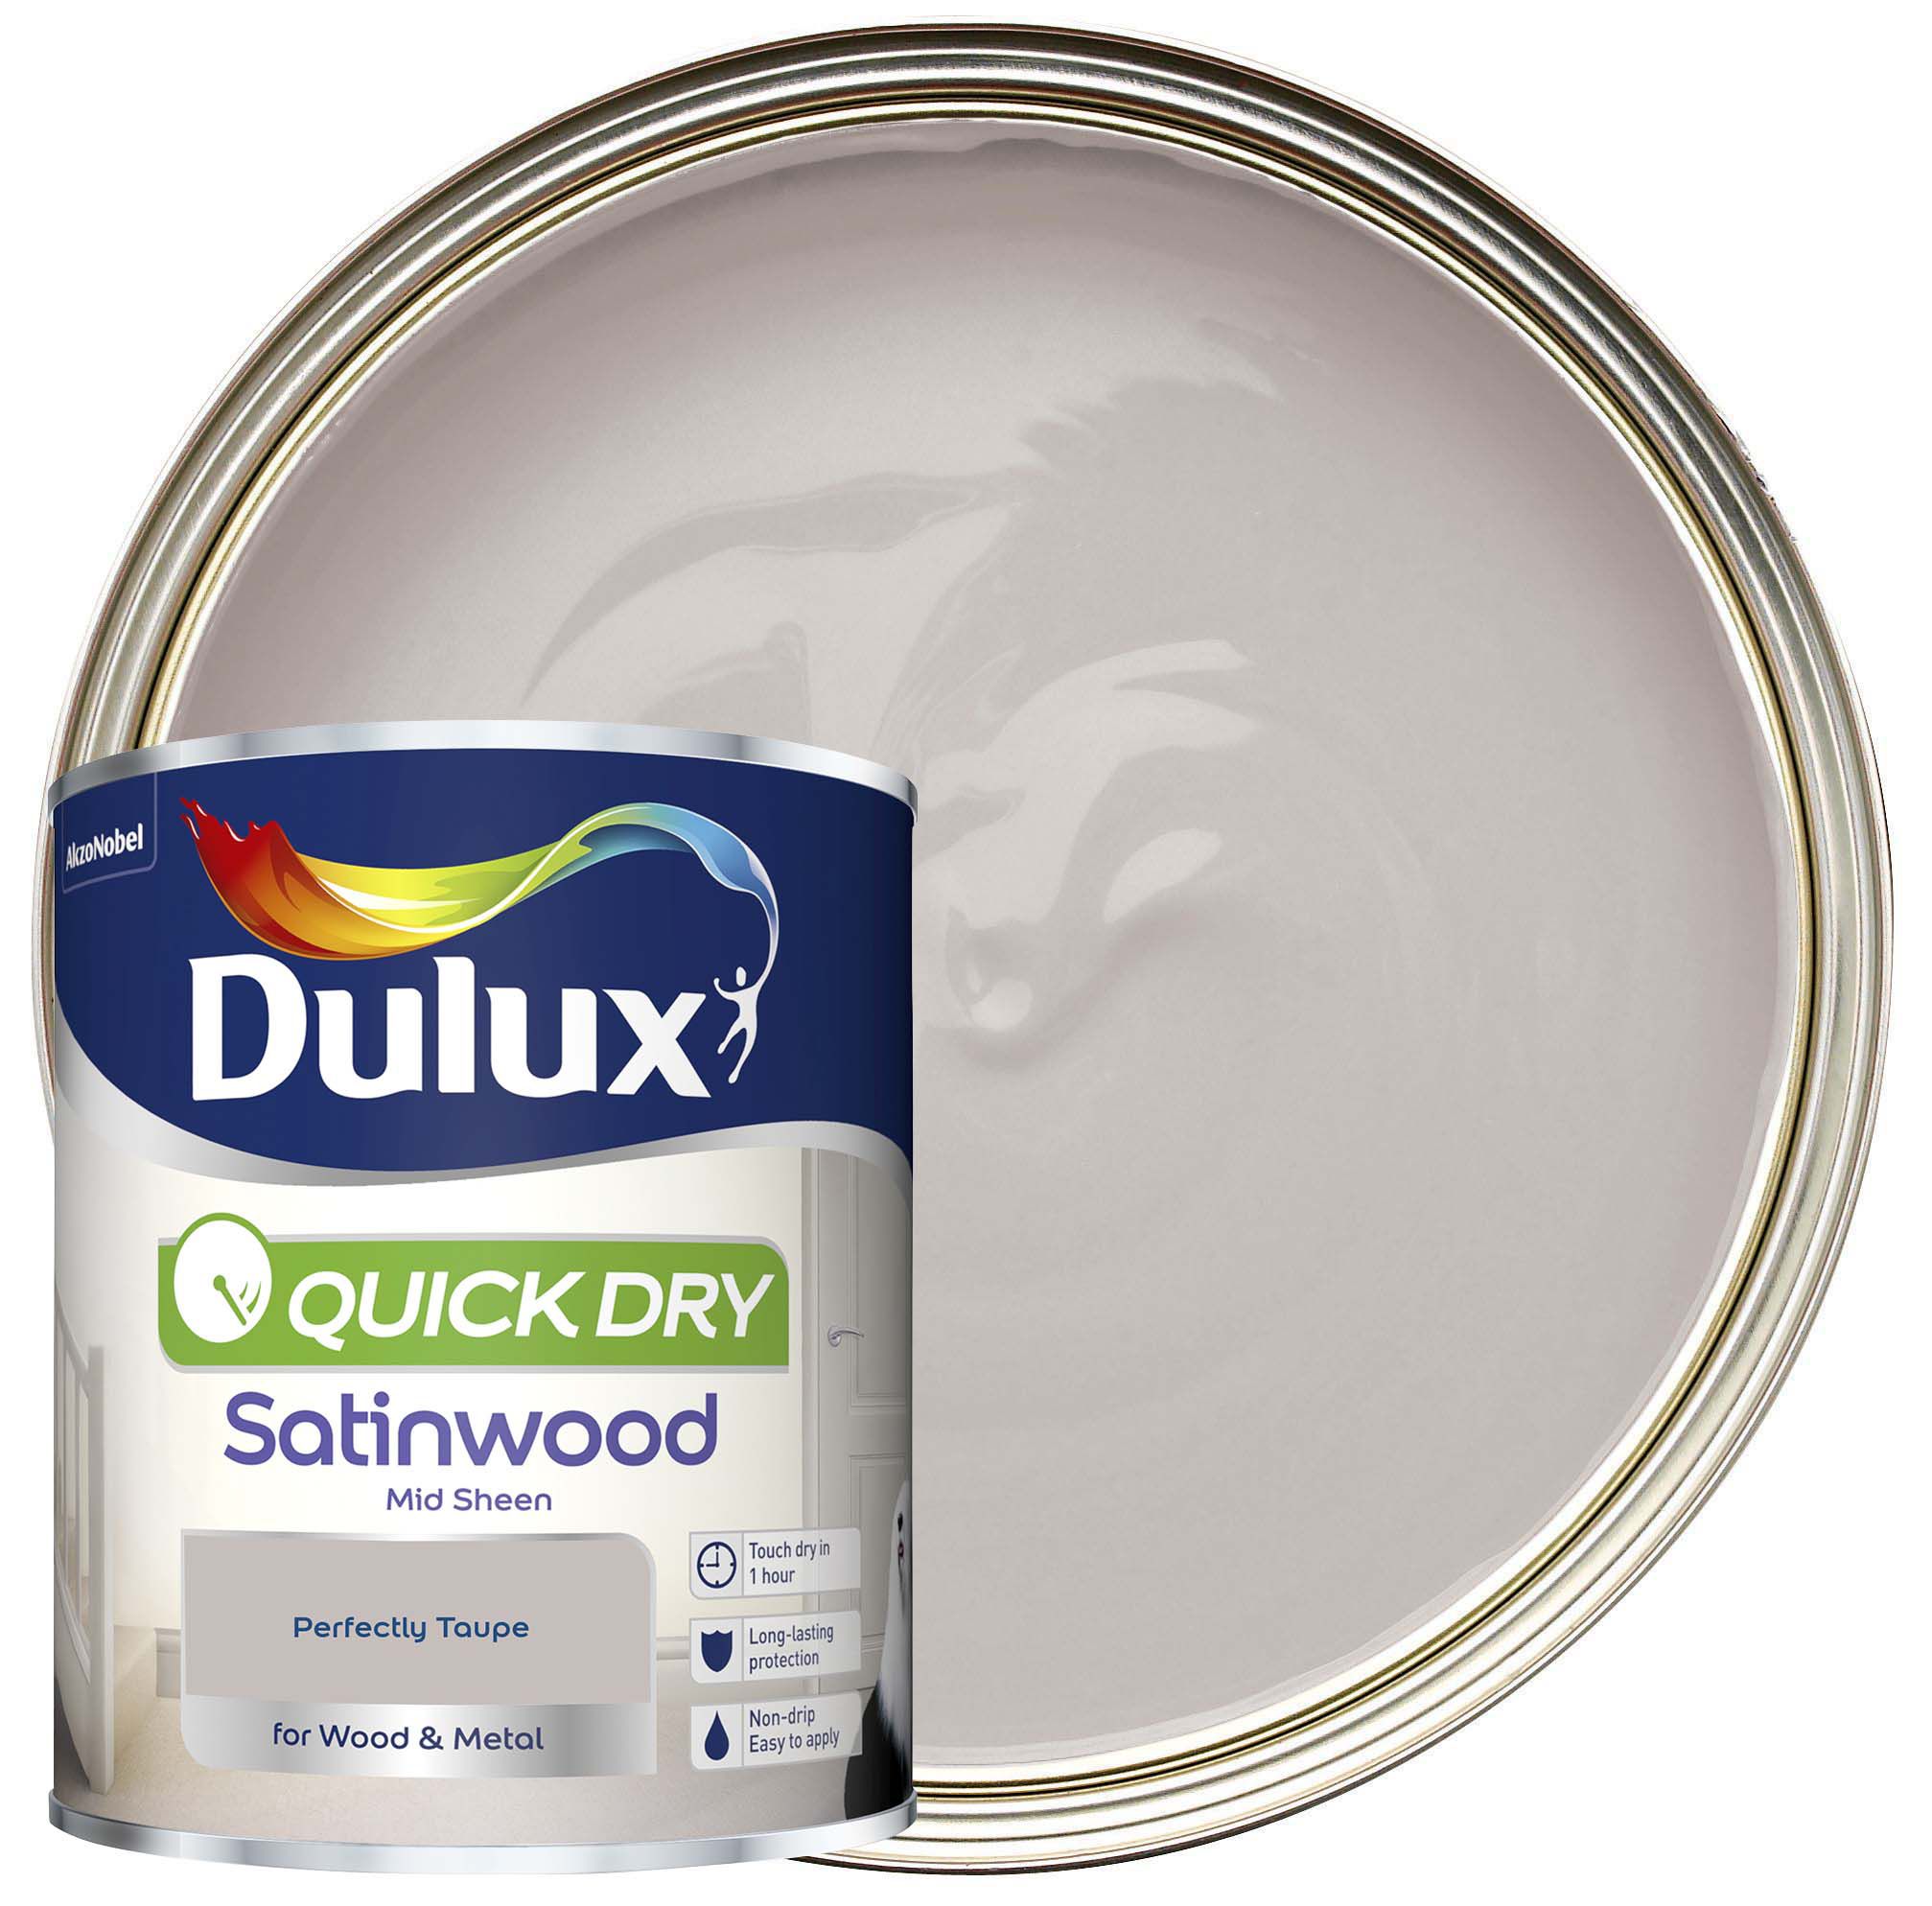 Image of Dulux Quick Drying Satinwood Paint - Perfectly Taupe - 750ml